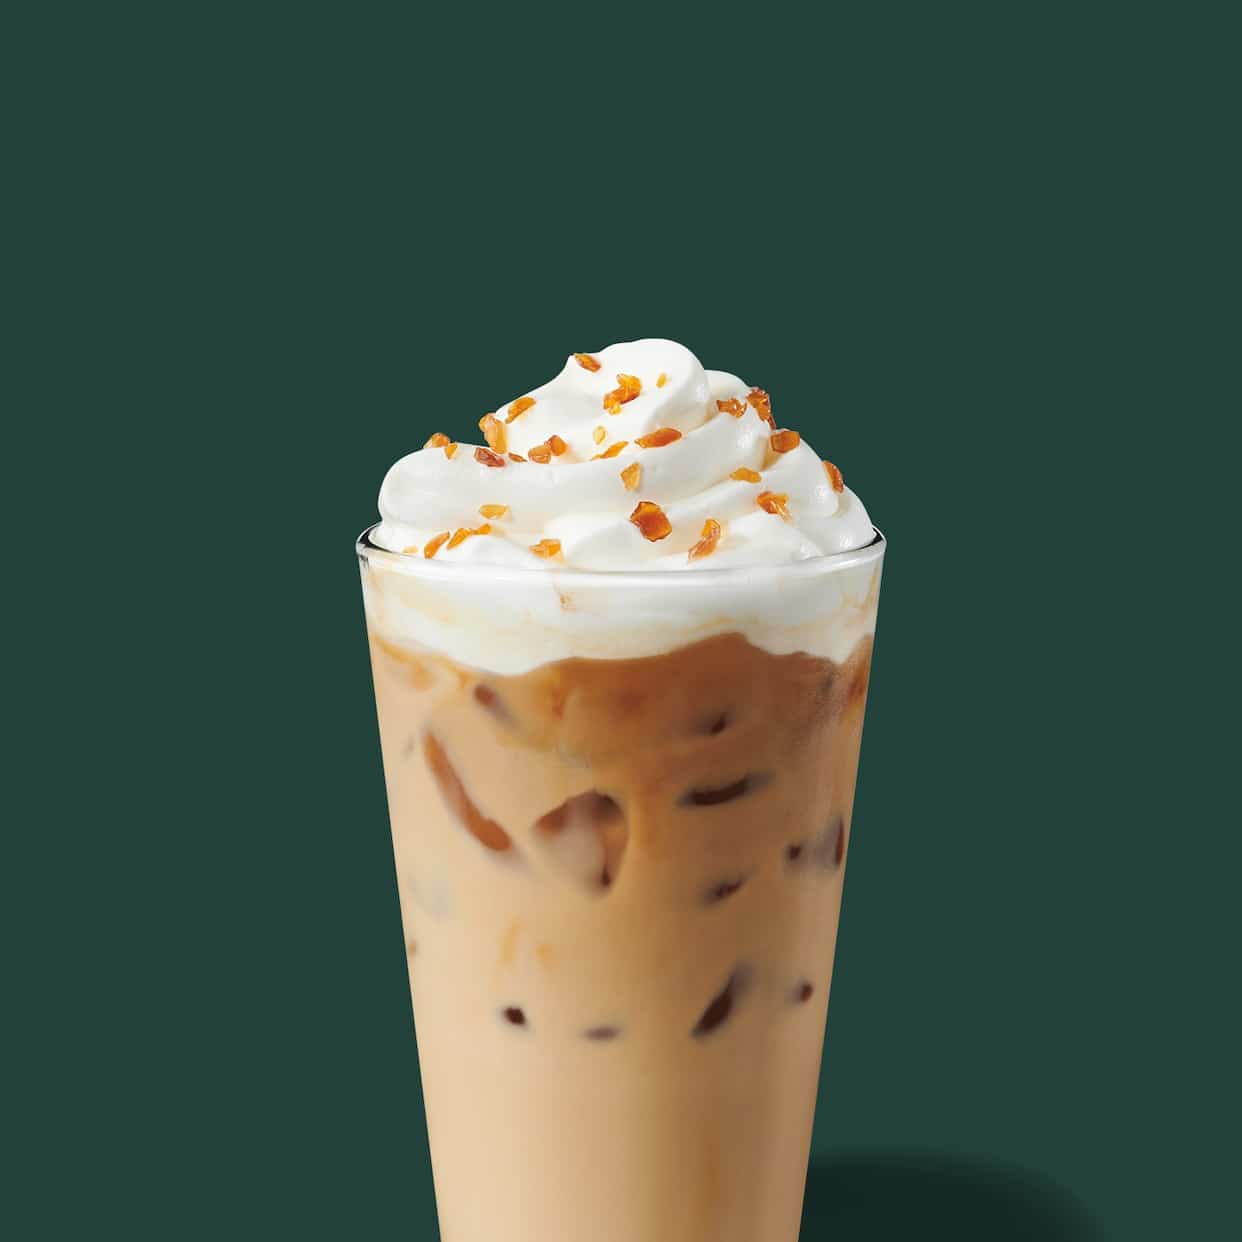 How Many Calories In A Caramel Iced Coffee From Starbucks